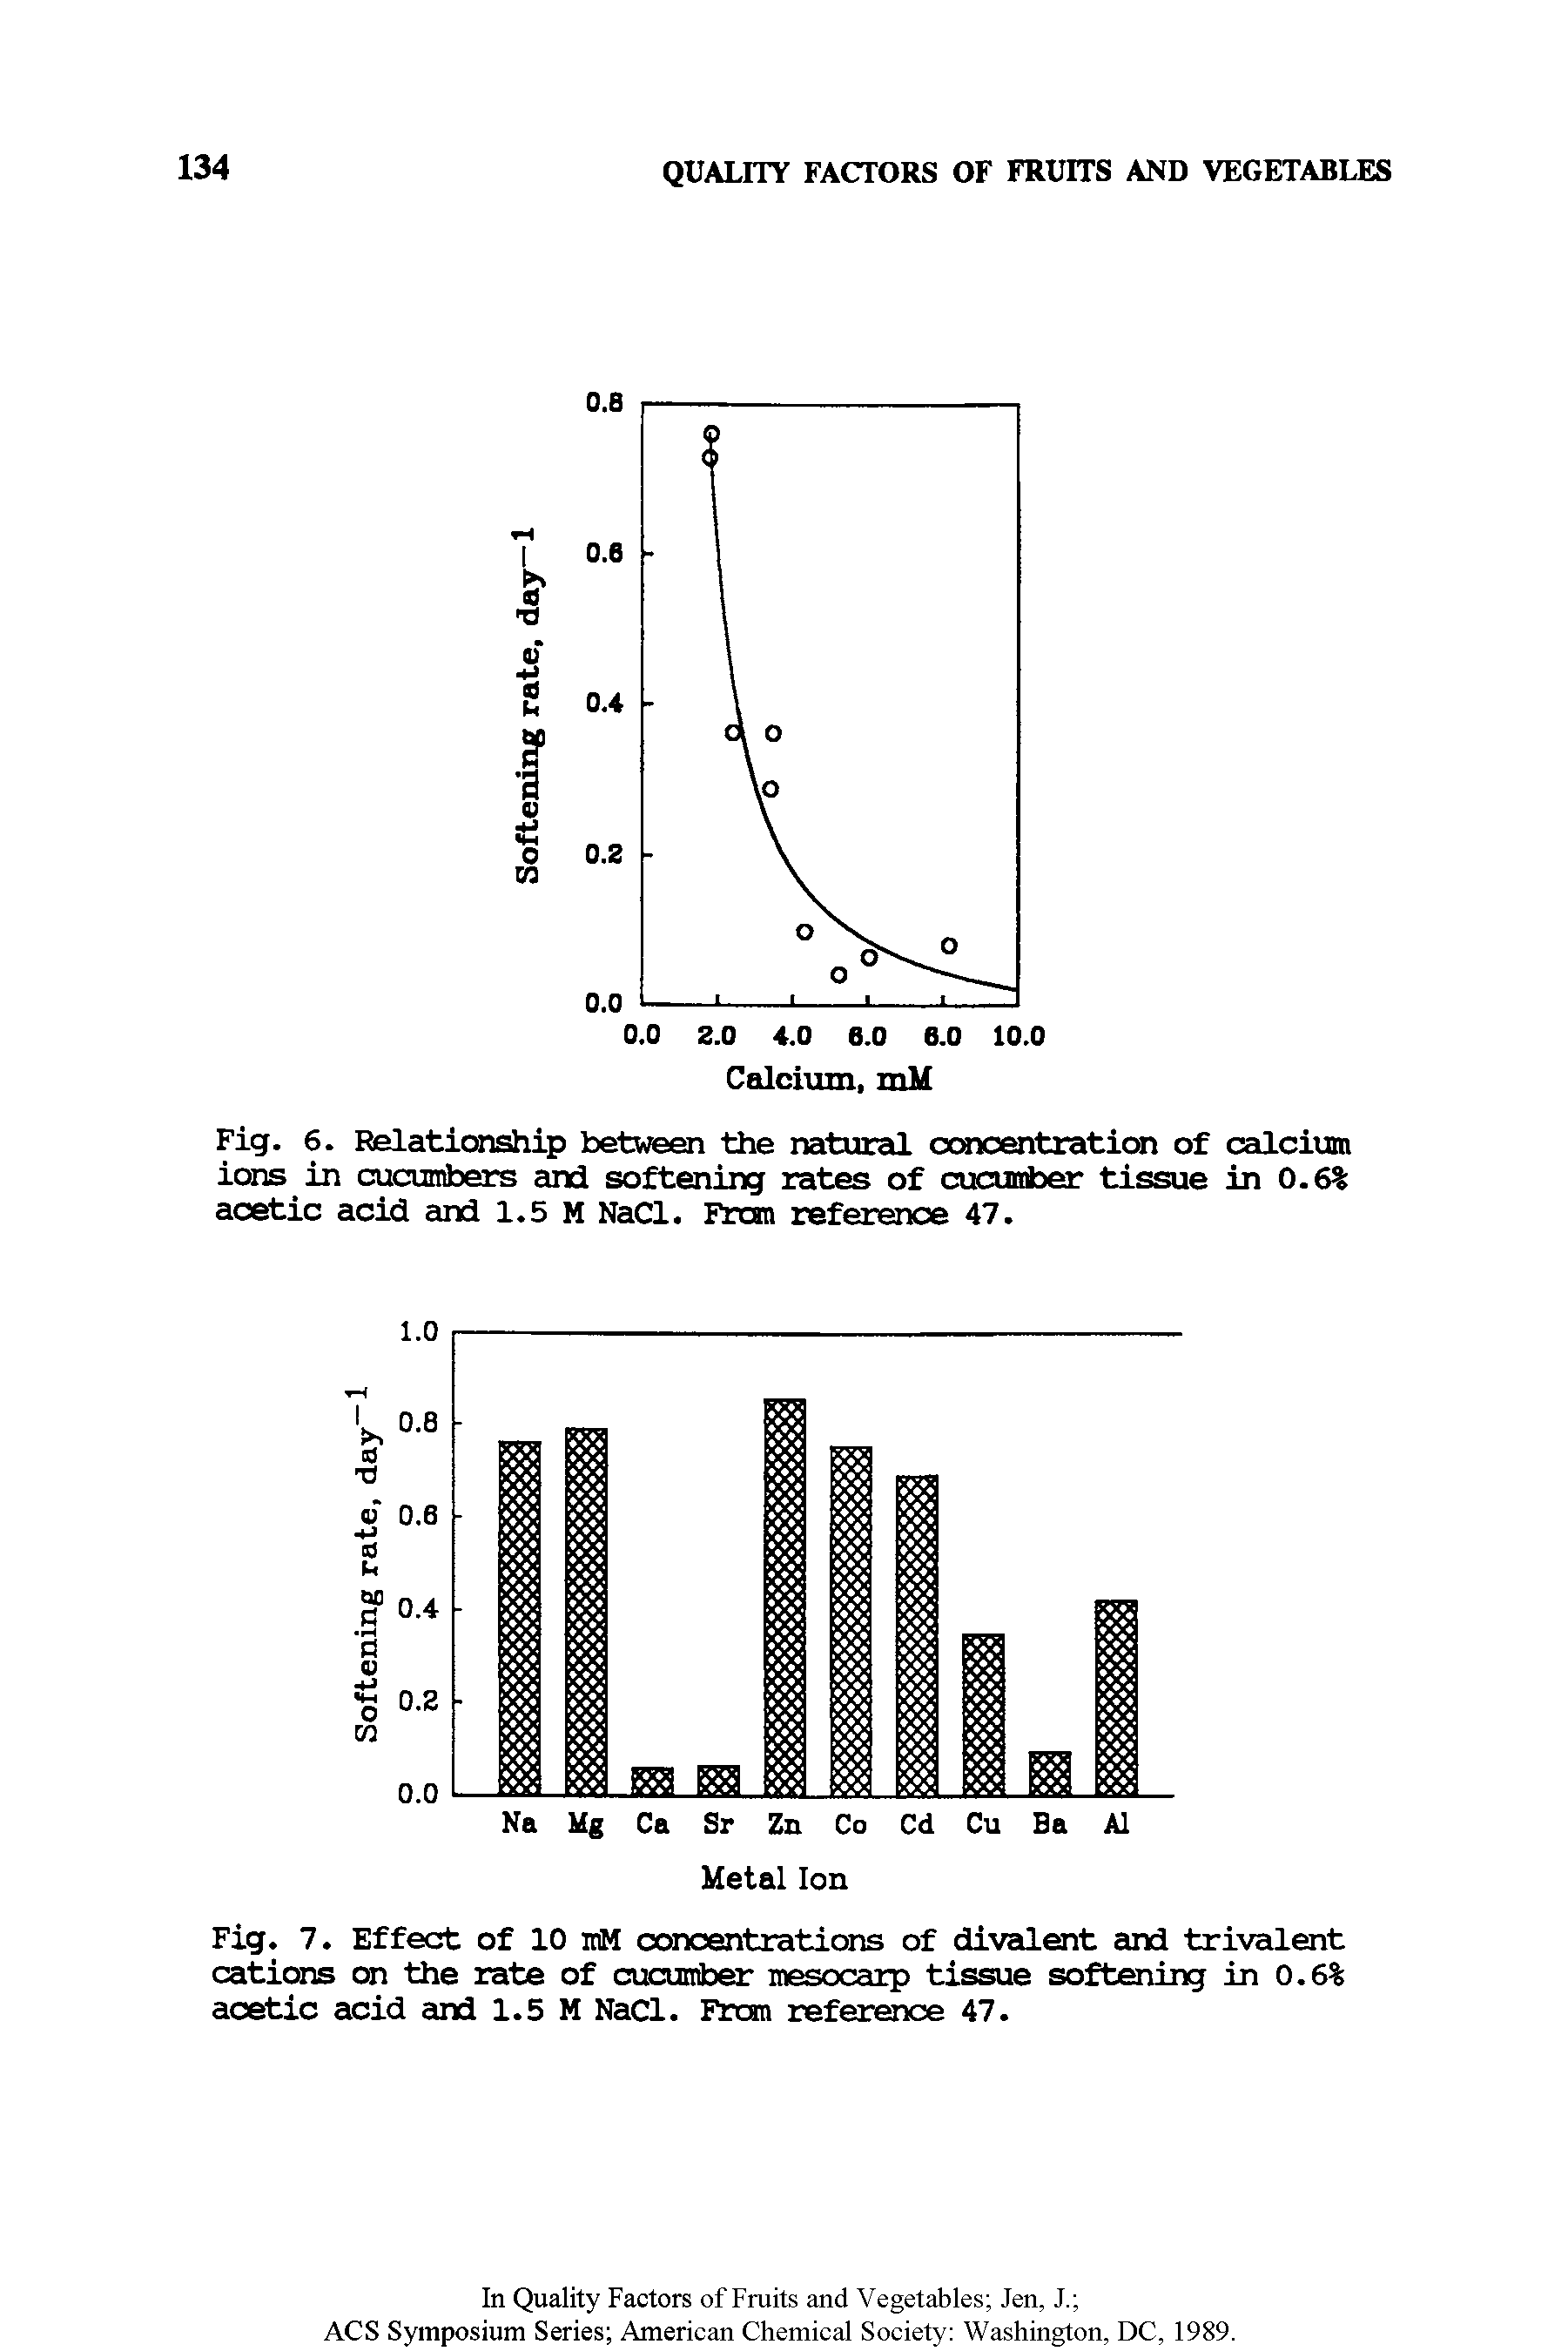 Fig. 6. Relationship between the natural concentration of calcium ions in cucumbers and softening rates of cucumber tissue in 0.6% acetic acid and 1.5 M NaCl. Fran reference 47.